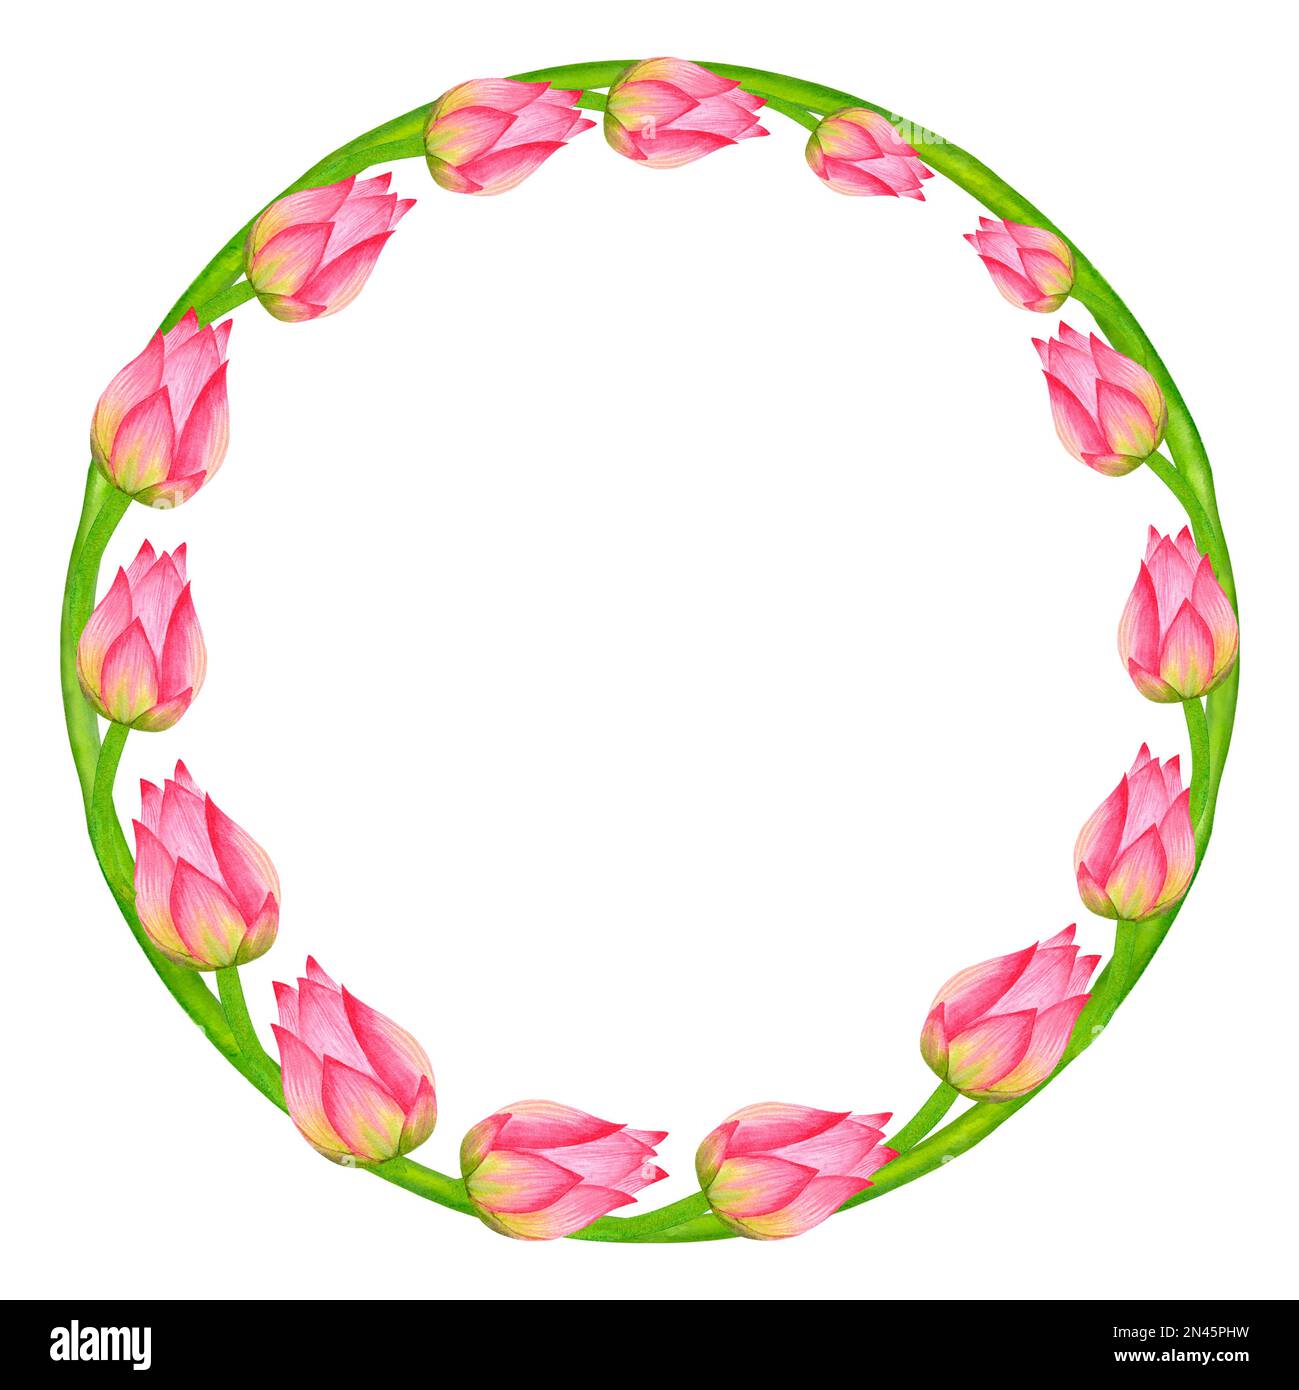 Round frame wreath of pink lotus buds and green stem. Tropical plant of Asia, sacred in Buddhism. Hand-drawn watercolor illustration isolated on white Stock Photo